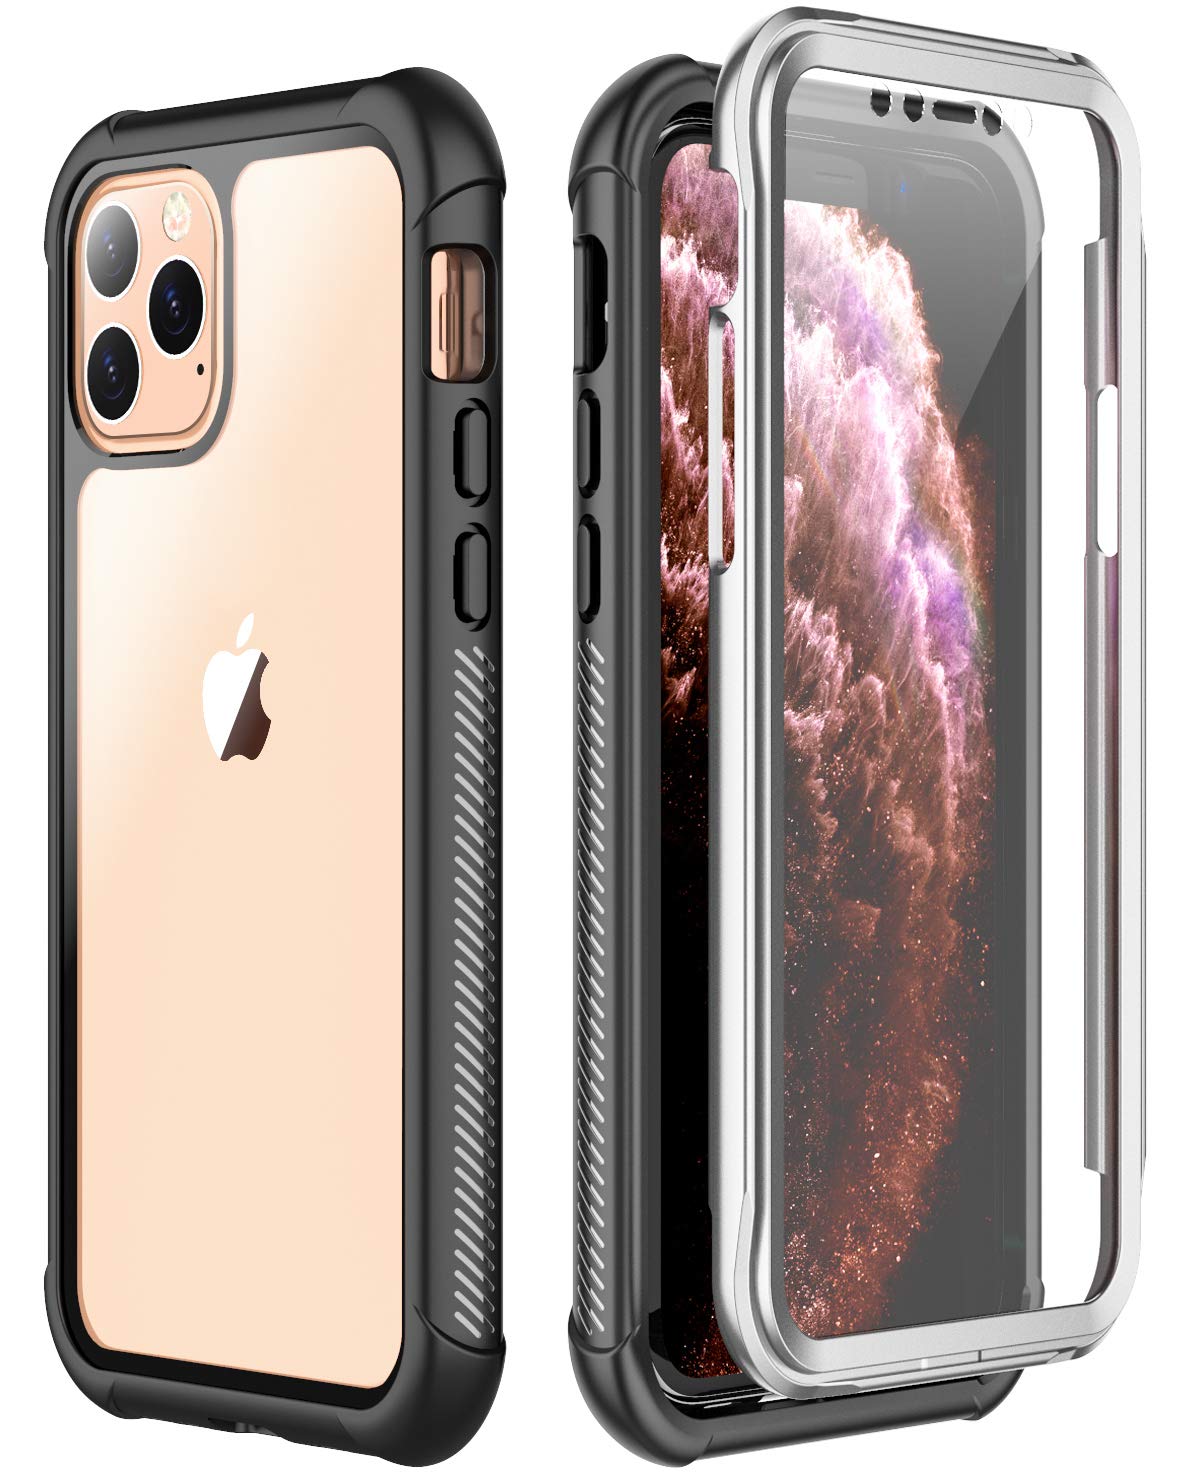 Cover for iPhone 13 Pro Max Black SPIDERCASE for iPhone 13 Pro Max Case, 10 FT Military Grade Drop Protection with 2 pcs Tempered Glass Screen Protector & 2 Pcs Camera Lens Protector 